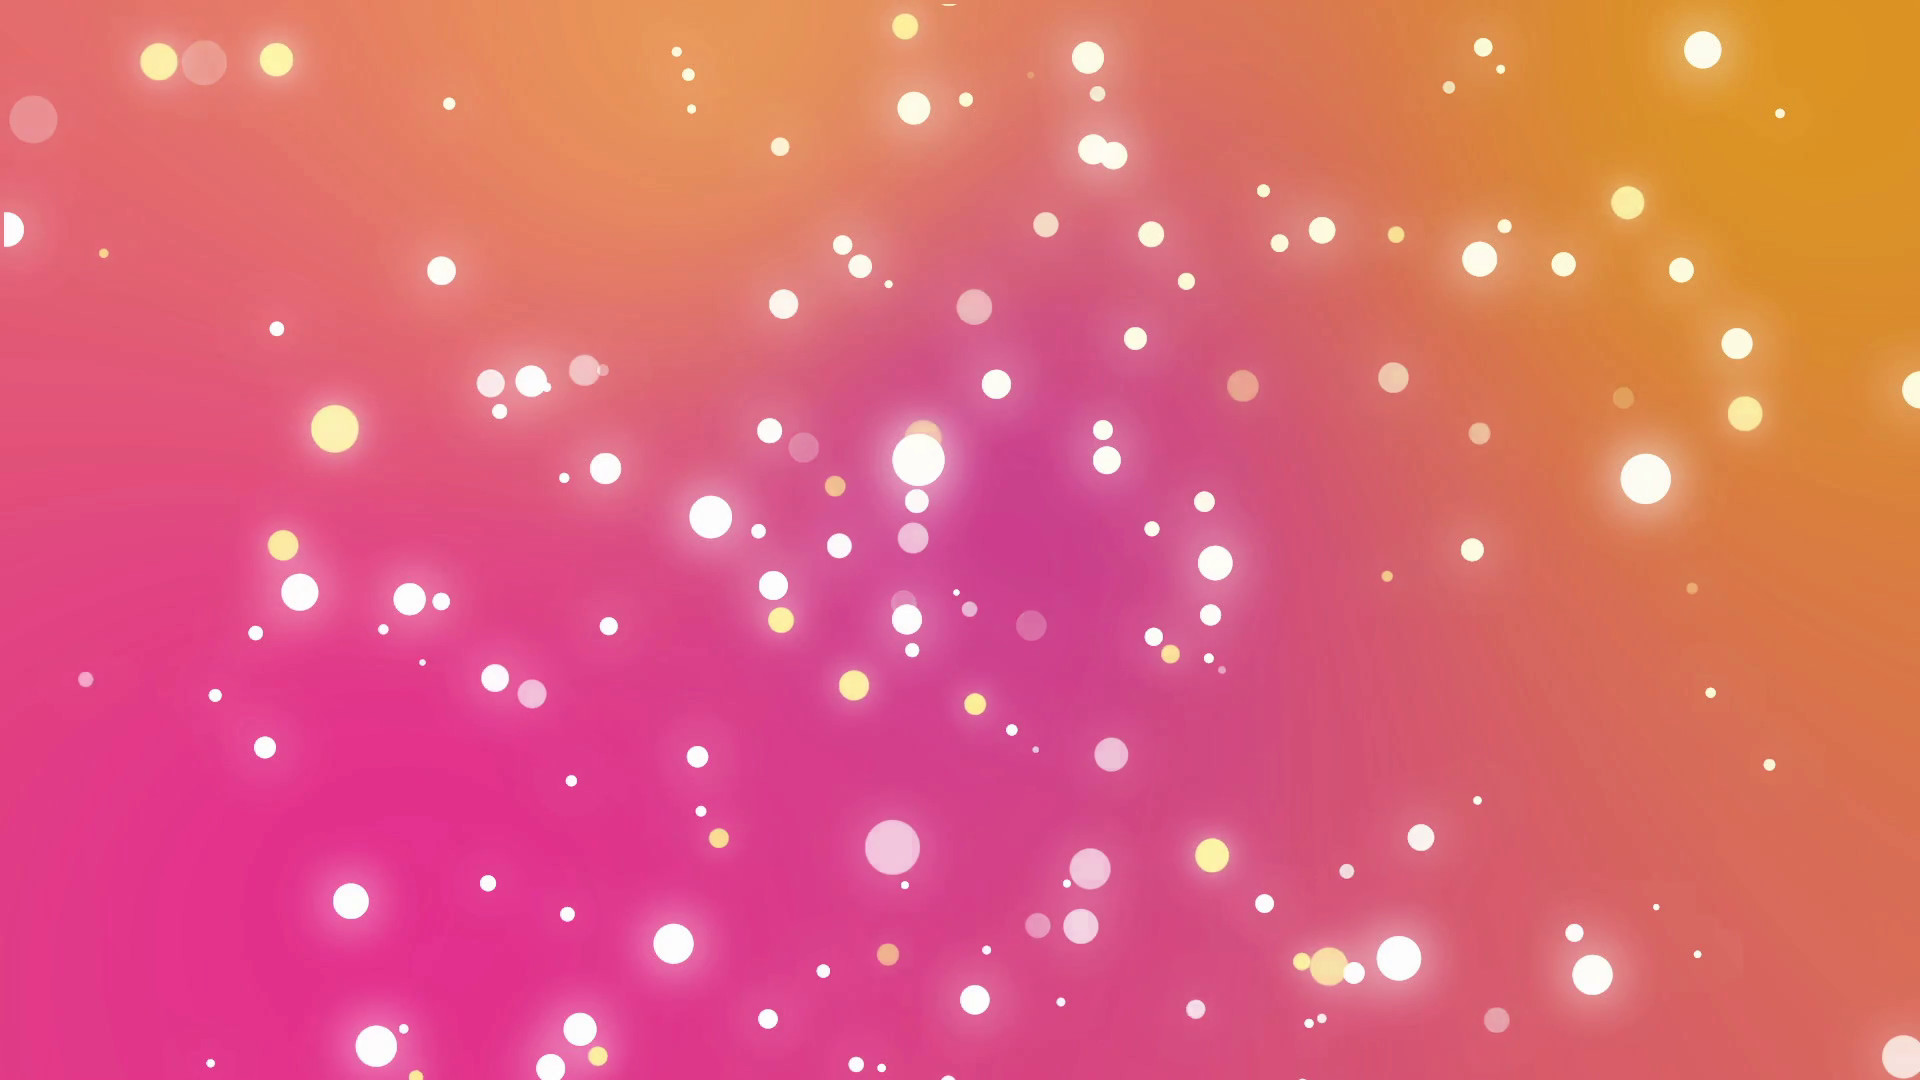 1920x1080 Festive Christmas background of sparkly white and yellow light particles  moving across a pink orange gradient backdrop Motion Background -  VideoBlocks